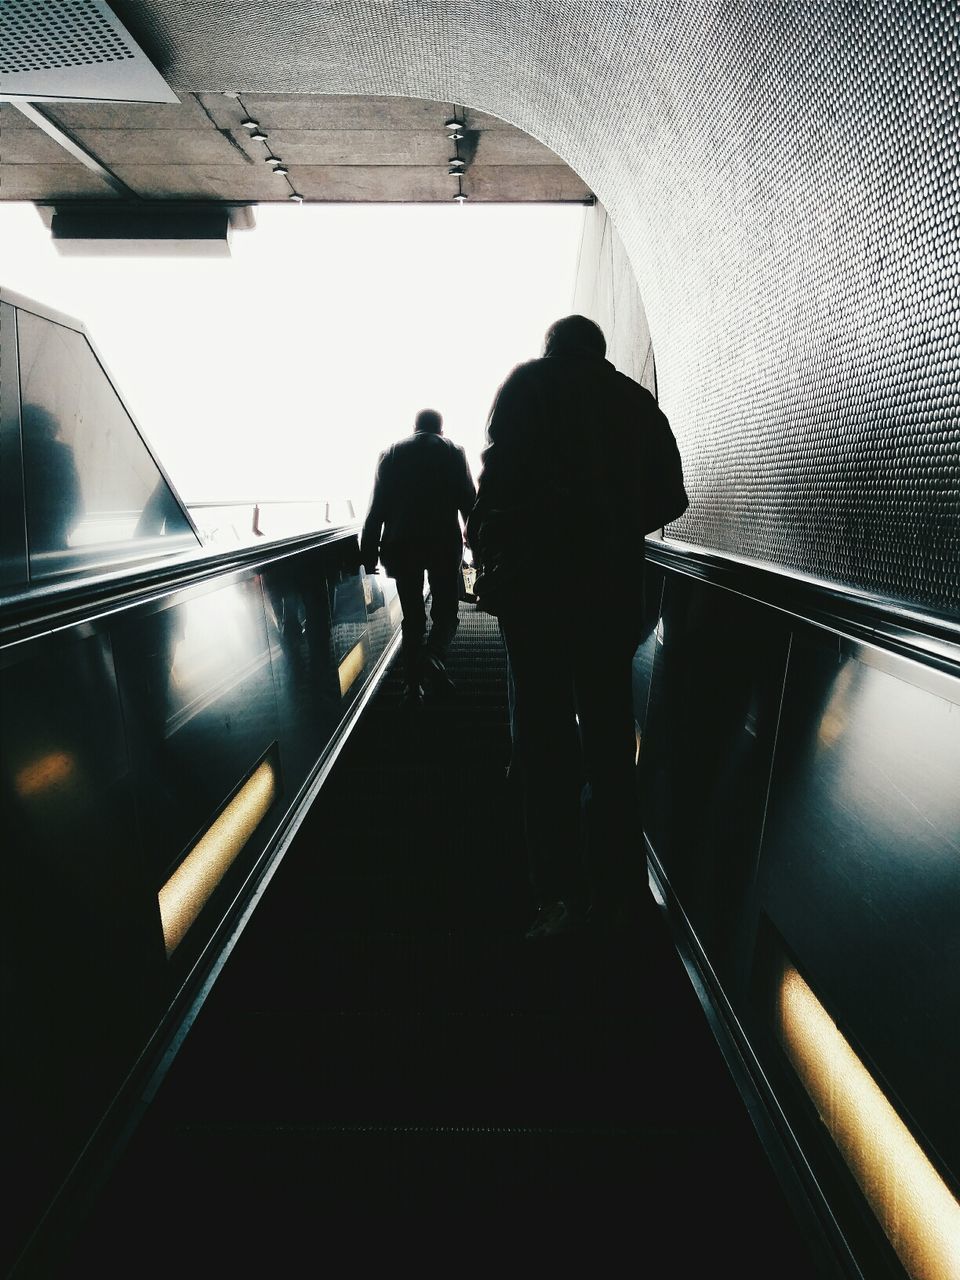 Low angle view of people walking up escalator